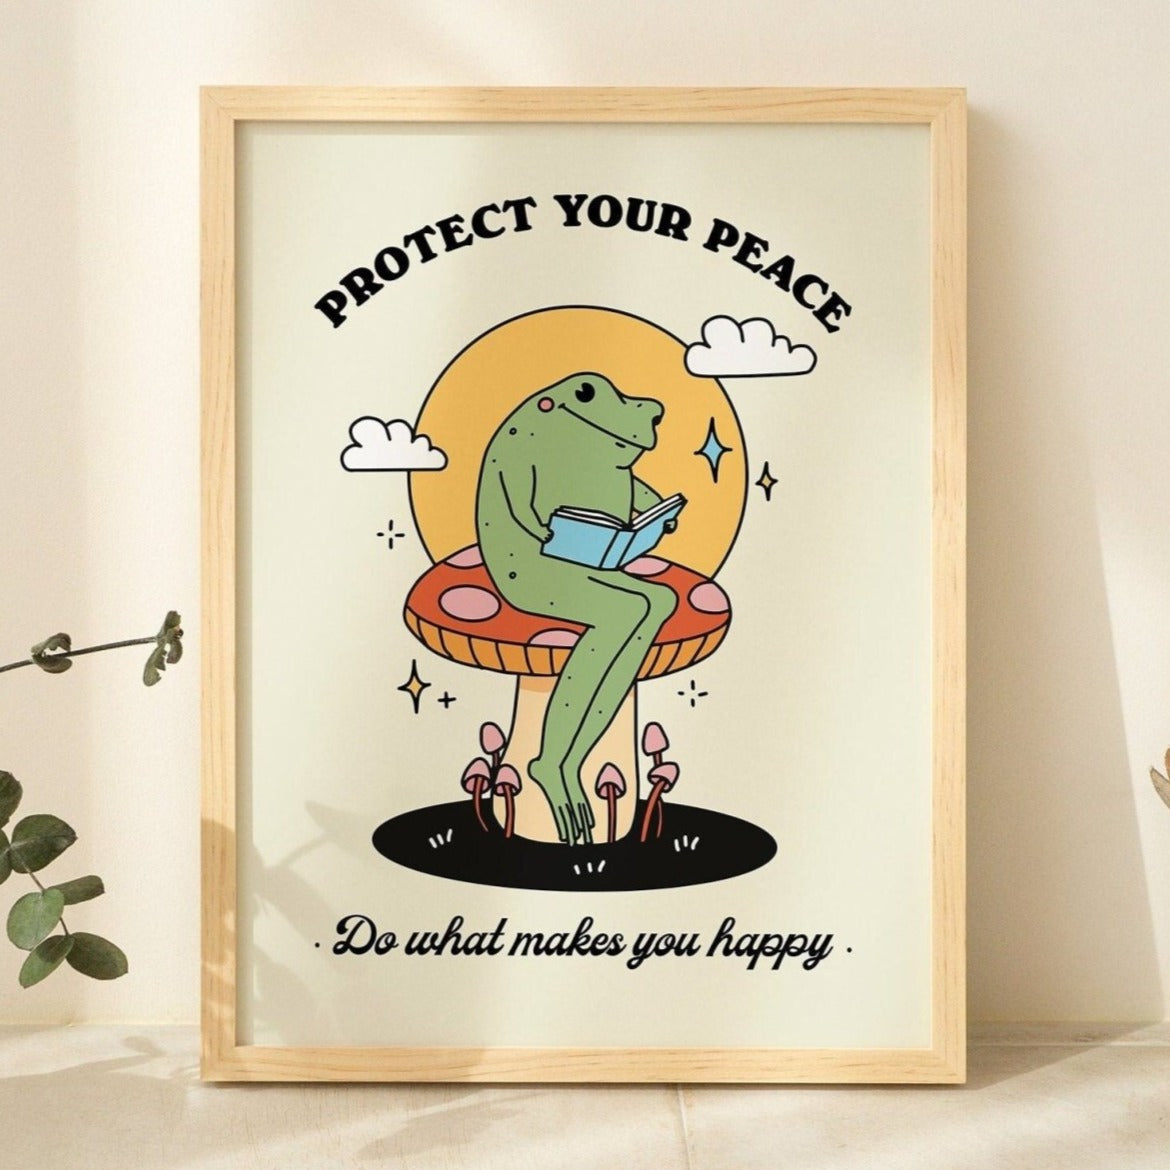 'Protect Your Peace' Frog Print - Art Prints - Kinder Planet Company